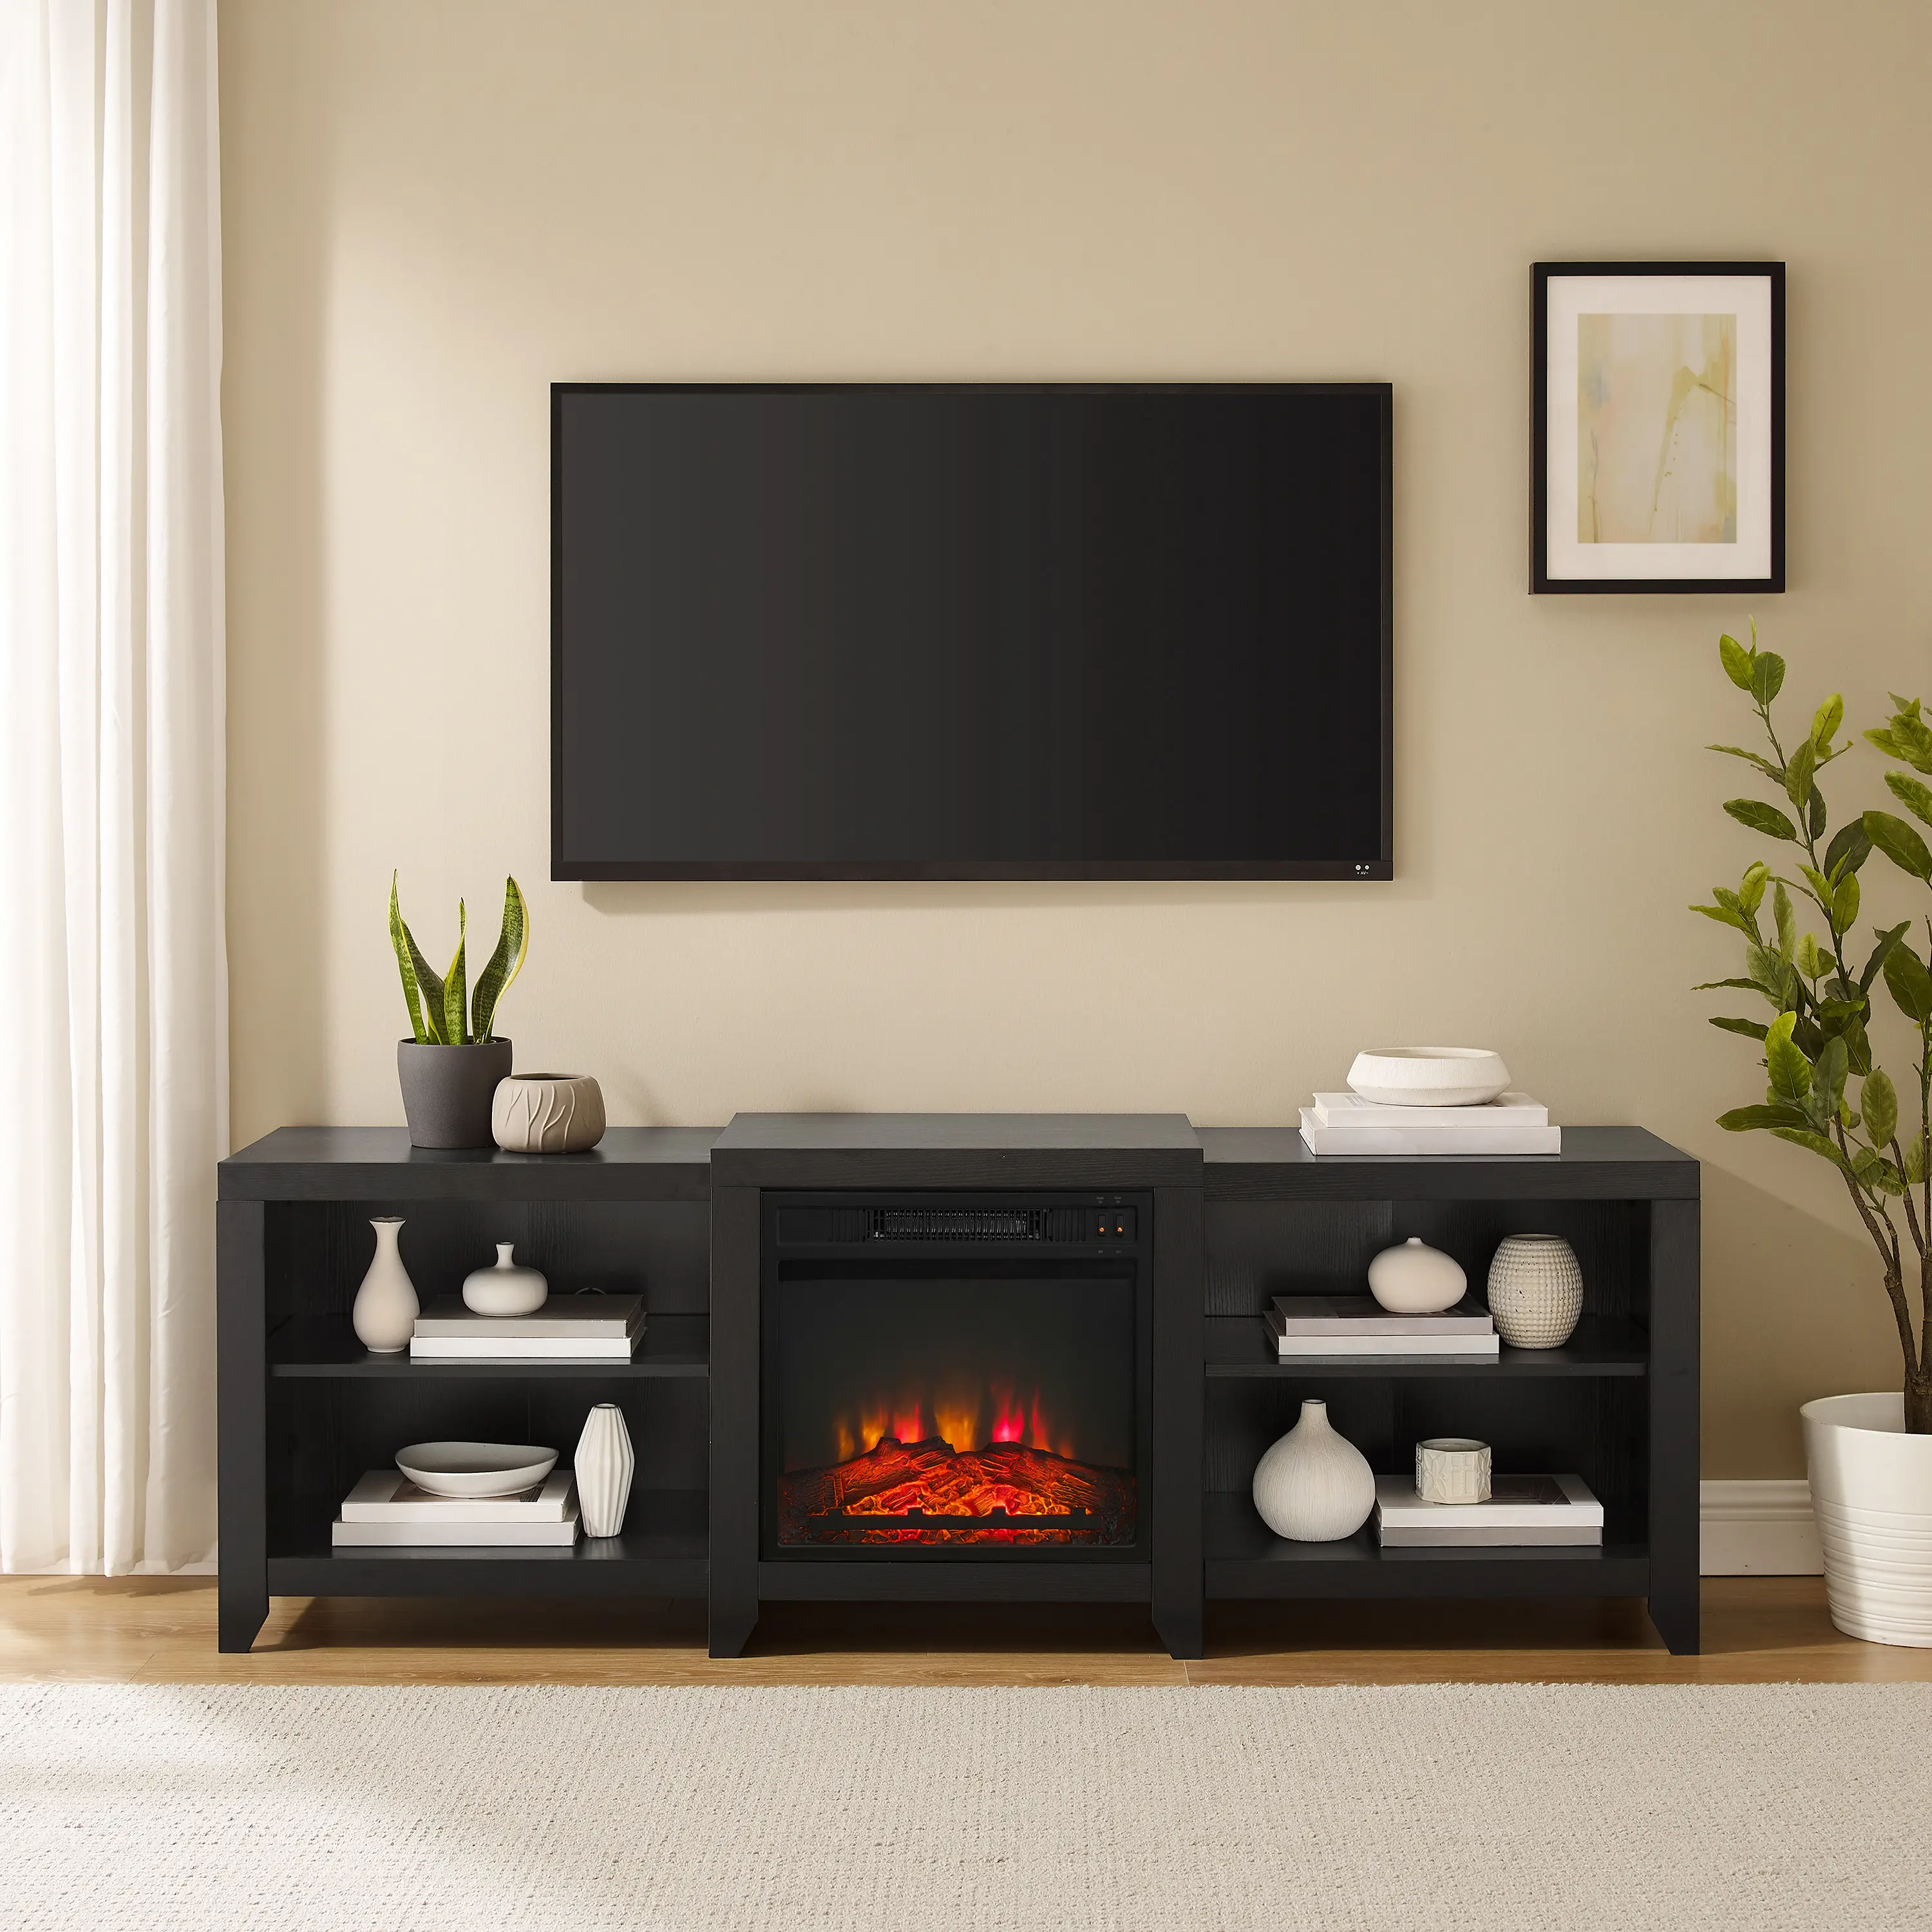 Ronin 69 Black TV Stand with Fireplace